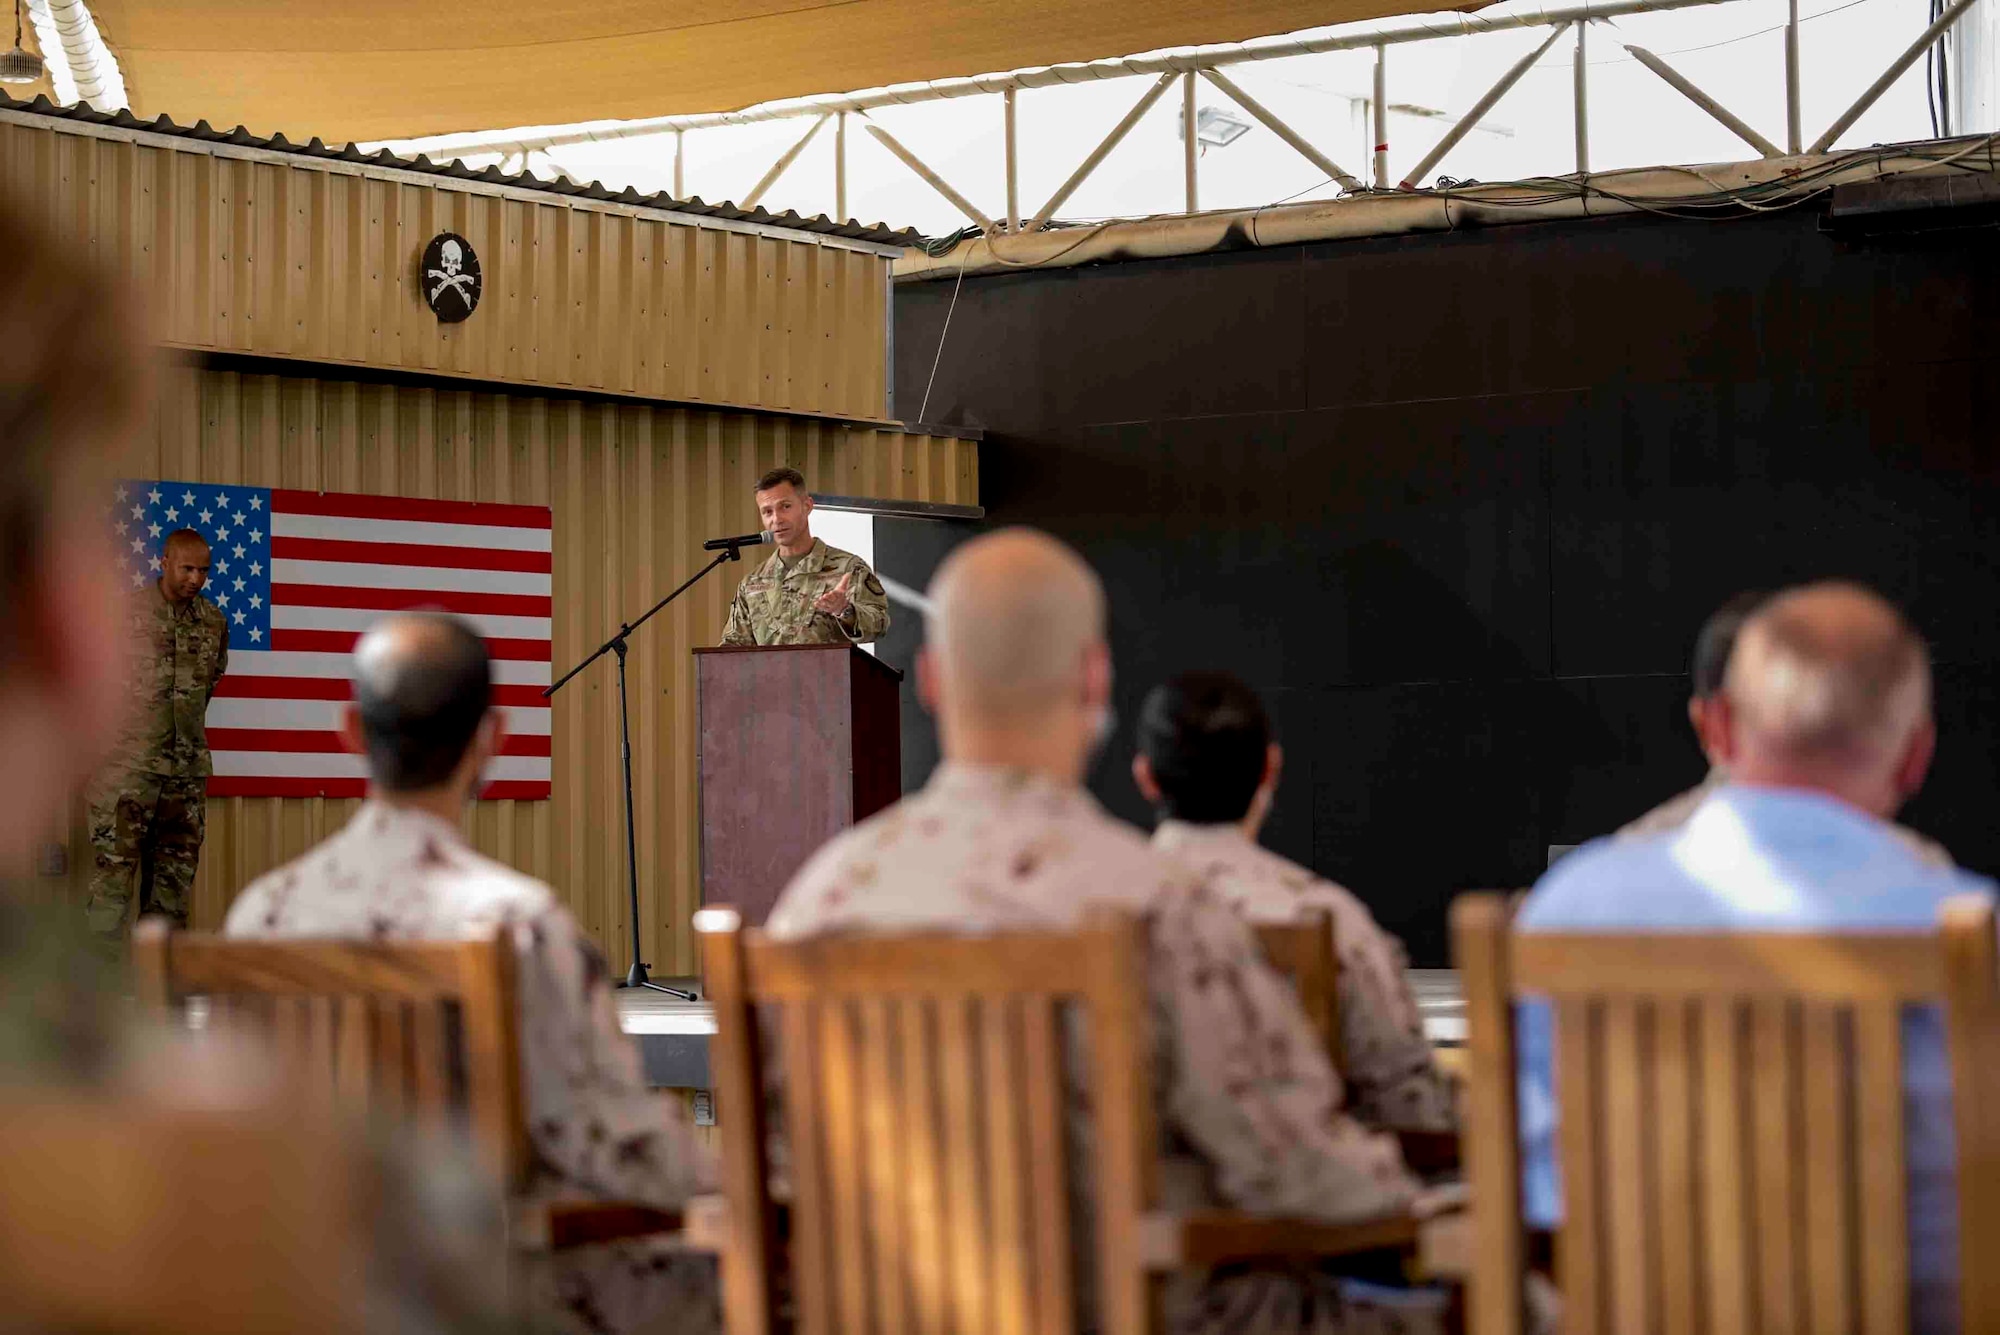 U.S. Air Force Brig. Gen. Larry Broadwell, outgoing commander, passes command of the 380th Air Expeditionary Wing to Brig. Gen. Andrew Clark, incoming commander, during a change of command ceremony at Al Dhafra Air Base, United Arab Emirates, June 8, 2021. The change of command ceremony is a military tradition that represents a formal transfer of authority and responsibility for a unit from one commanding officer to another.